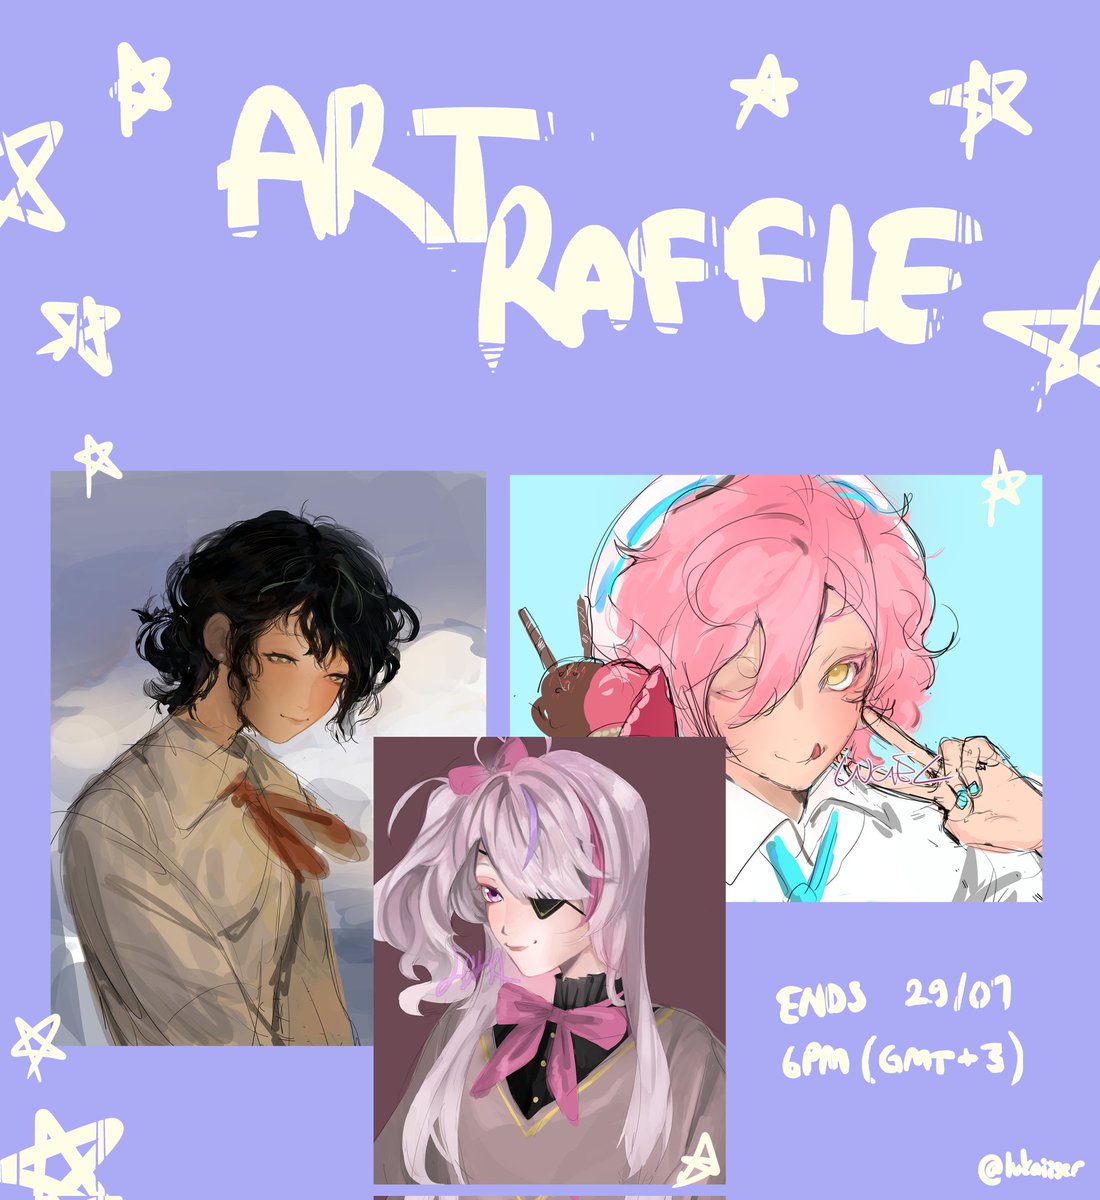 FREE ART RAFFLE✨
RT+follow to participate!!

Ends this Saturday (29/07) 6pm (GMT+3)
#Raffle #ArtRaffle #FreeArtRaffle